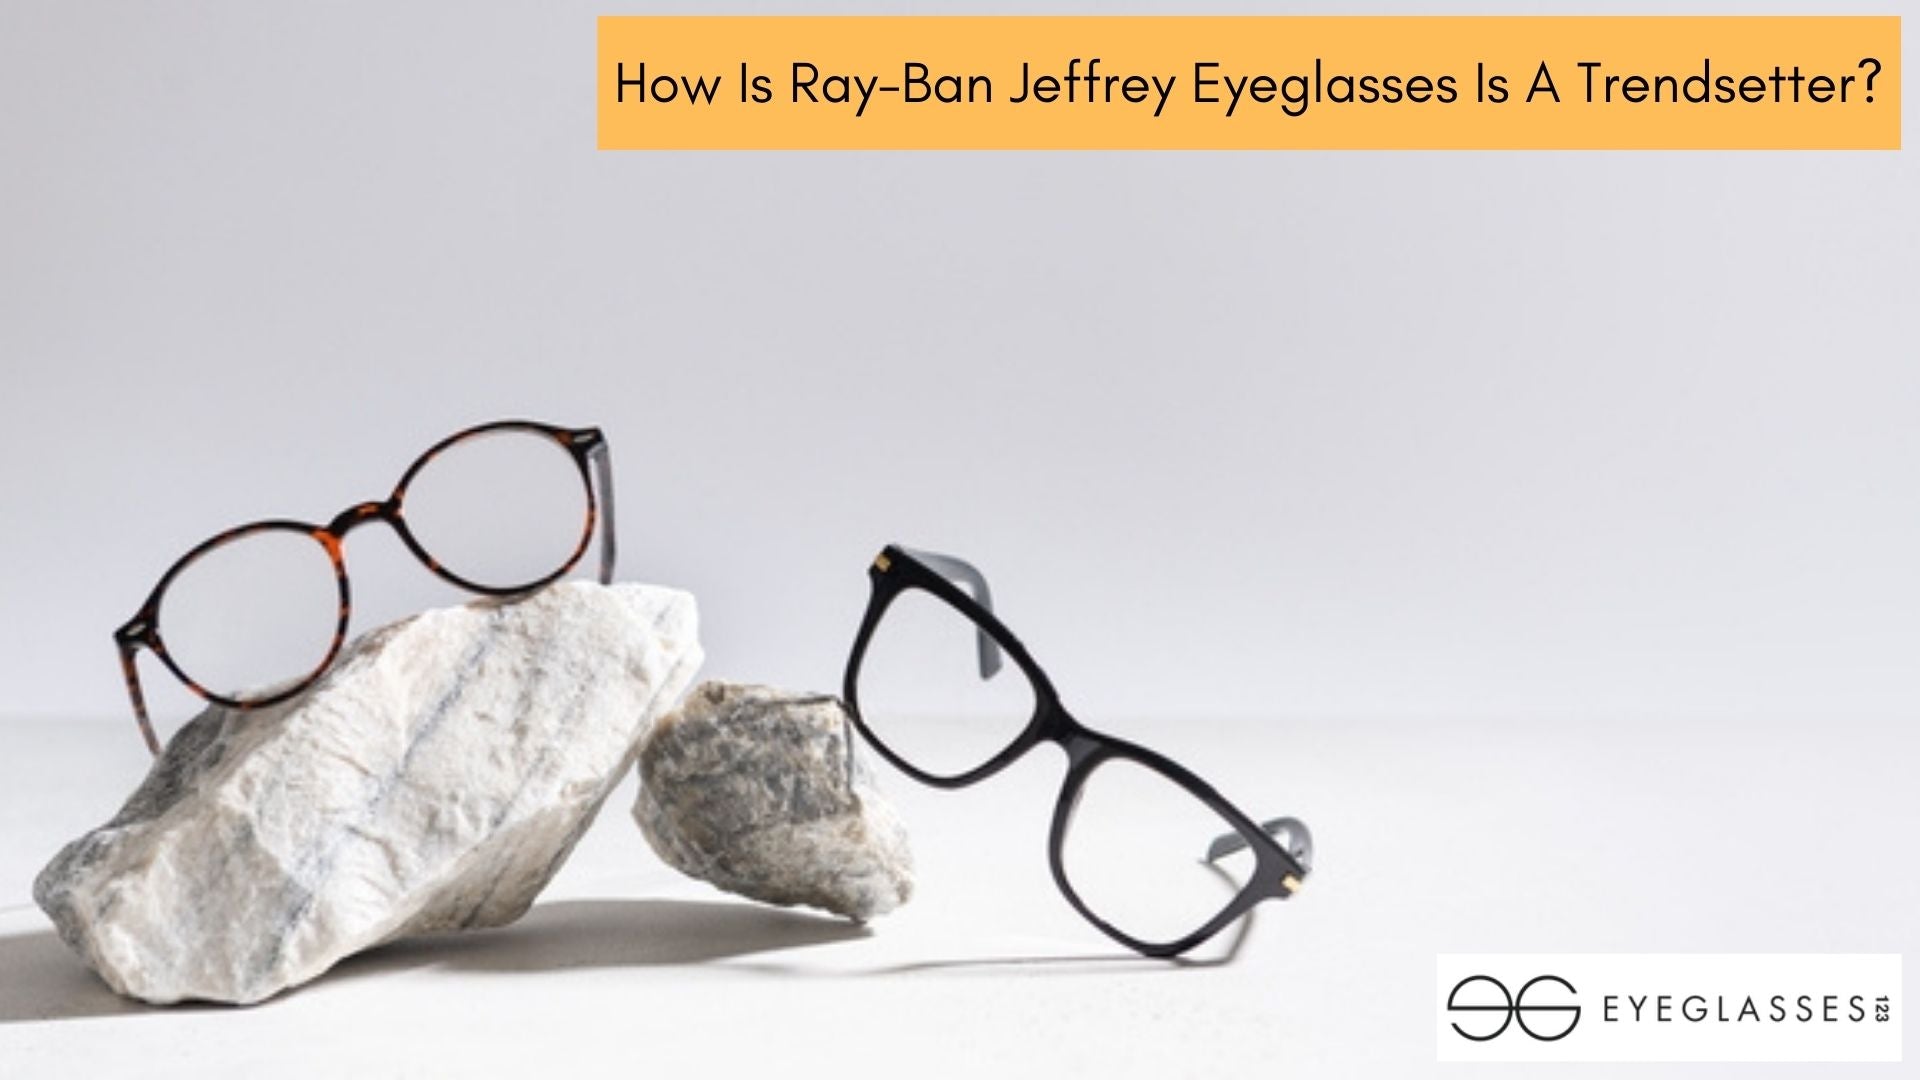 How Is Ray-Ban Jeffrey Eyeglasses Is A Trendsetter?